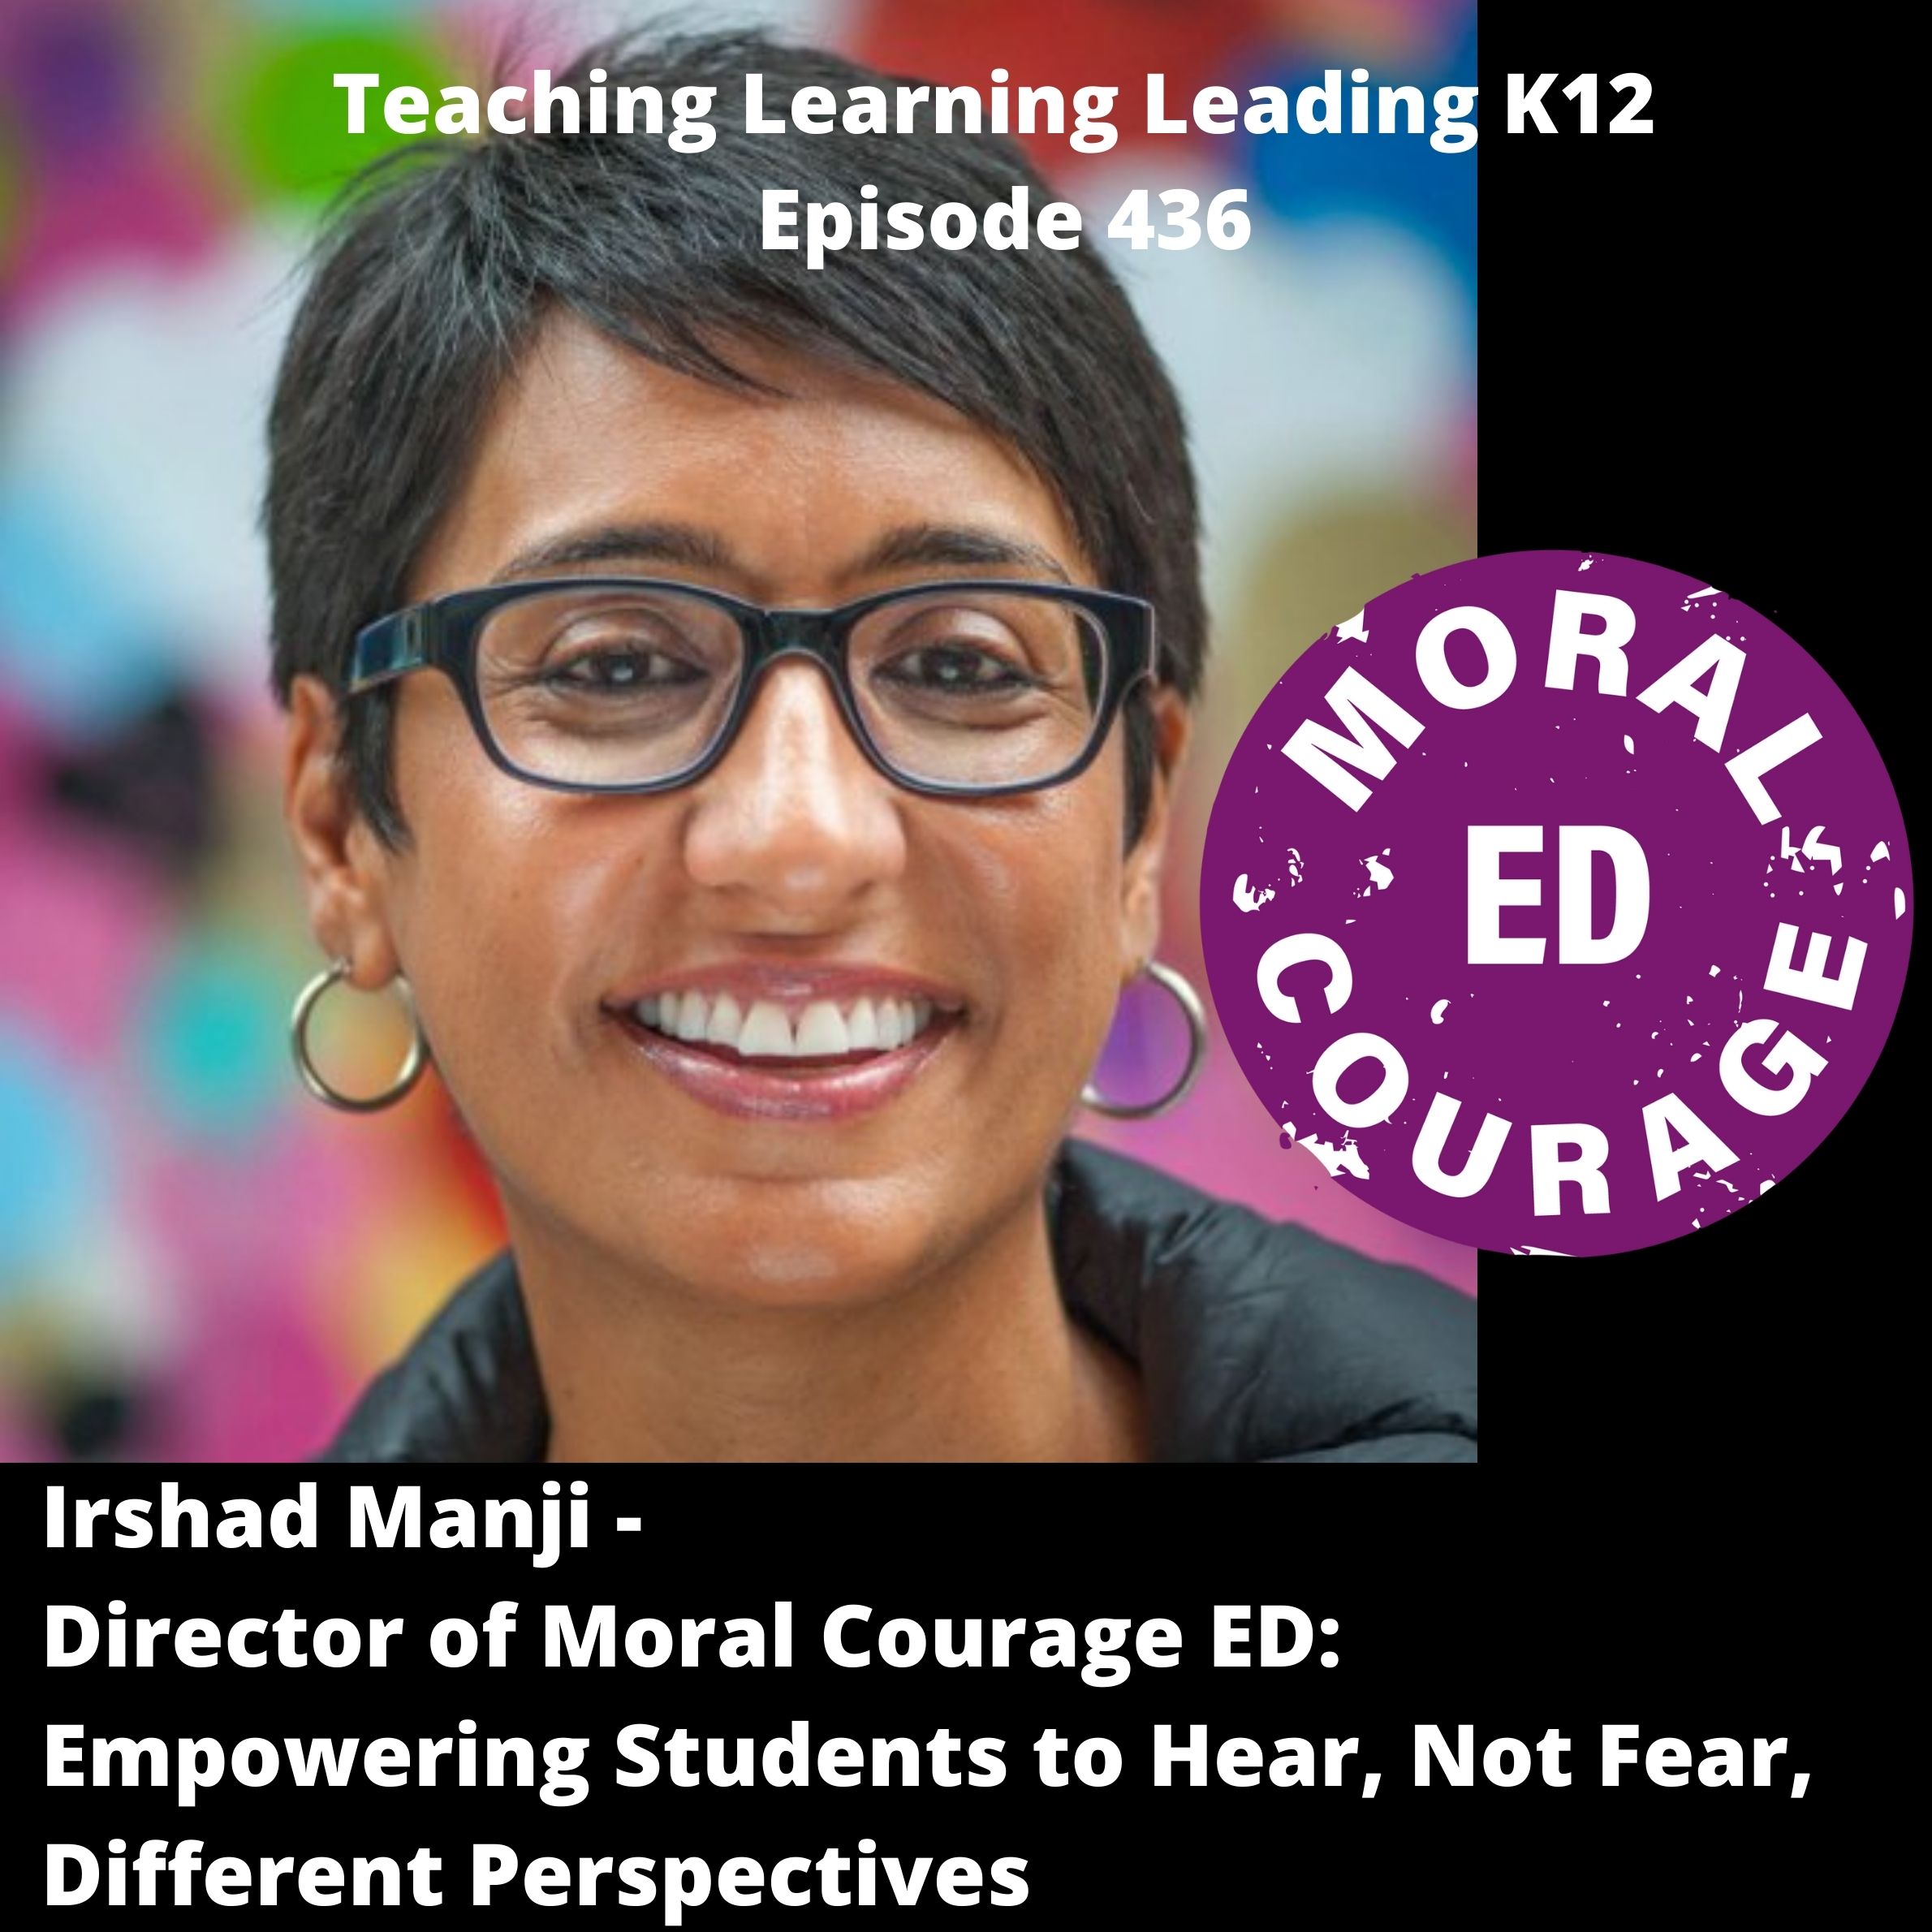 Irshad Manji - Director of Moral Courage ED: Empowering Students to Hear, Not Fear, Other Perspectives - 436 Image